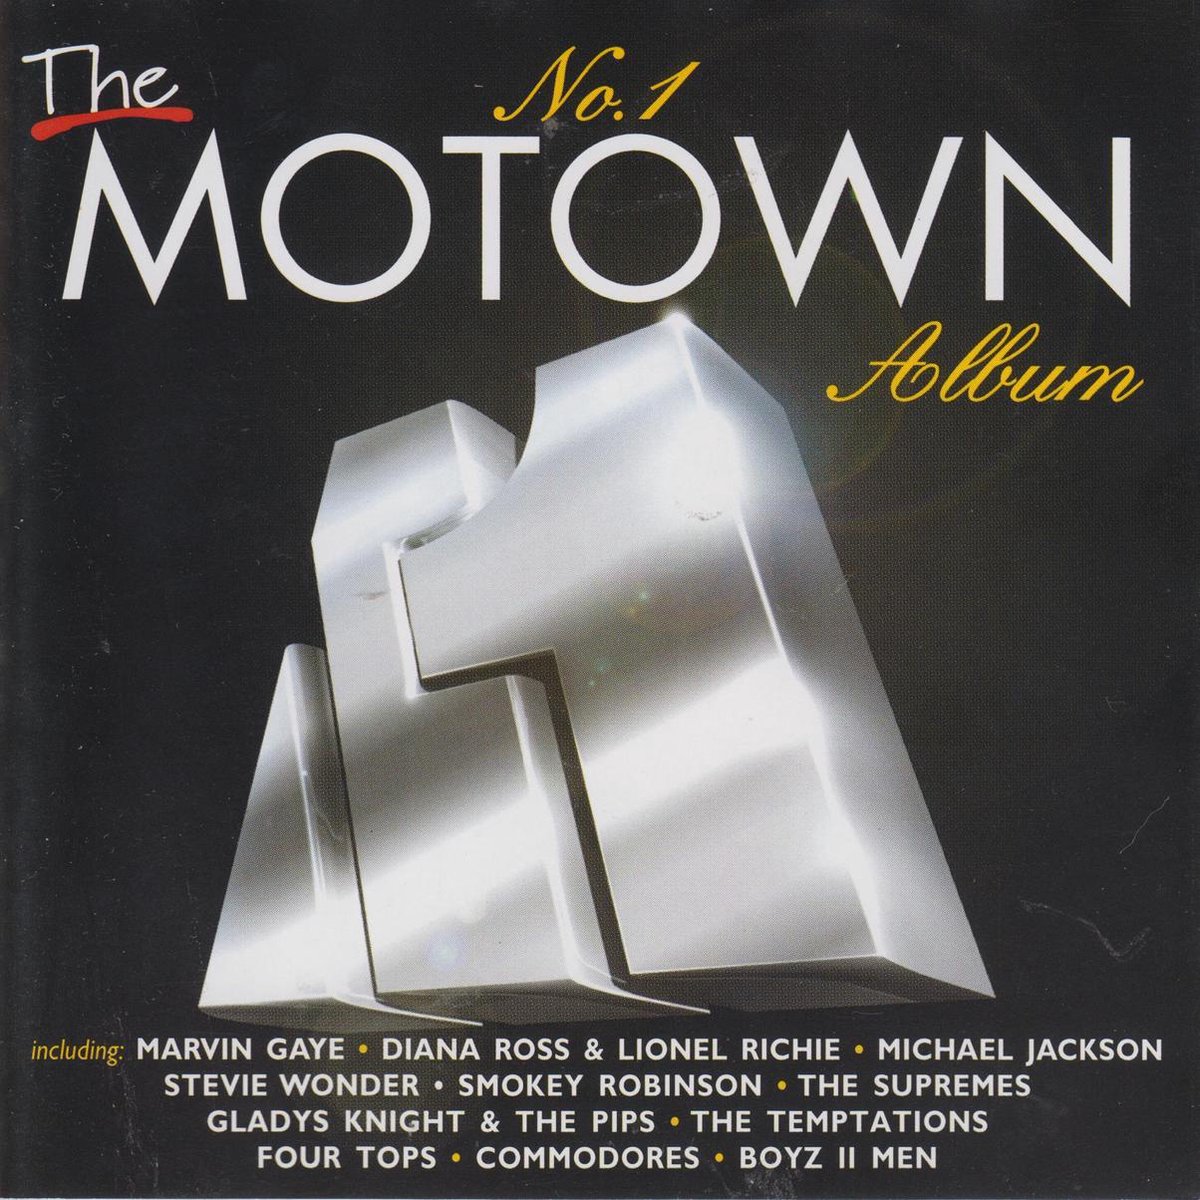 Number One Motown - various artists